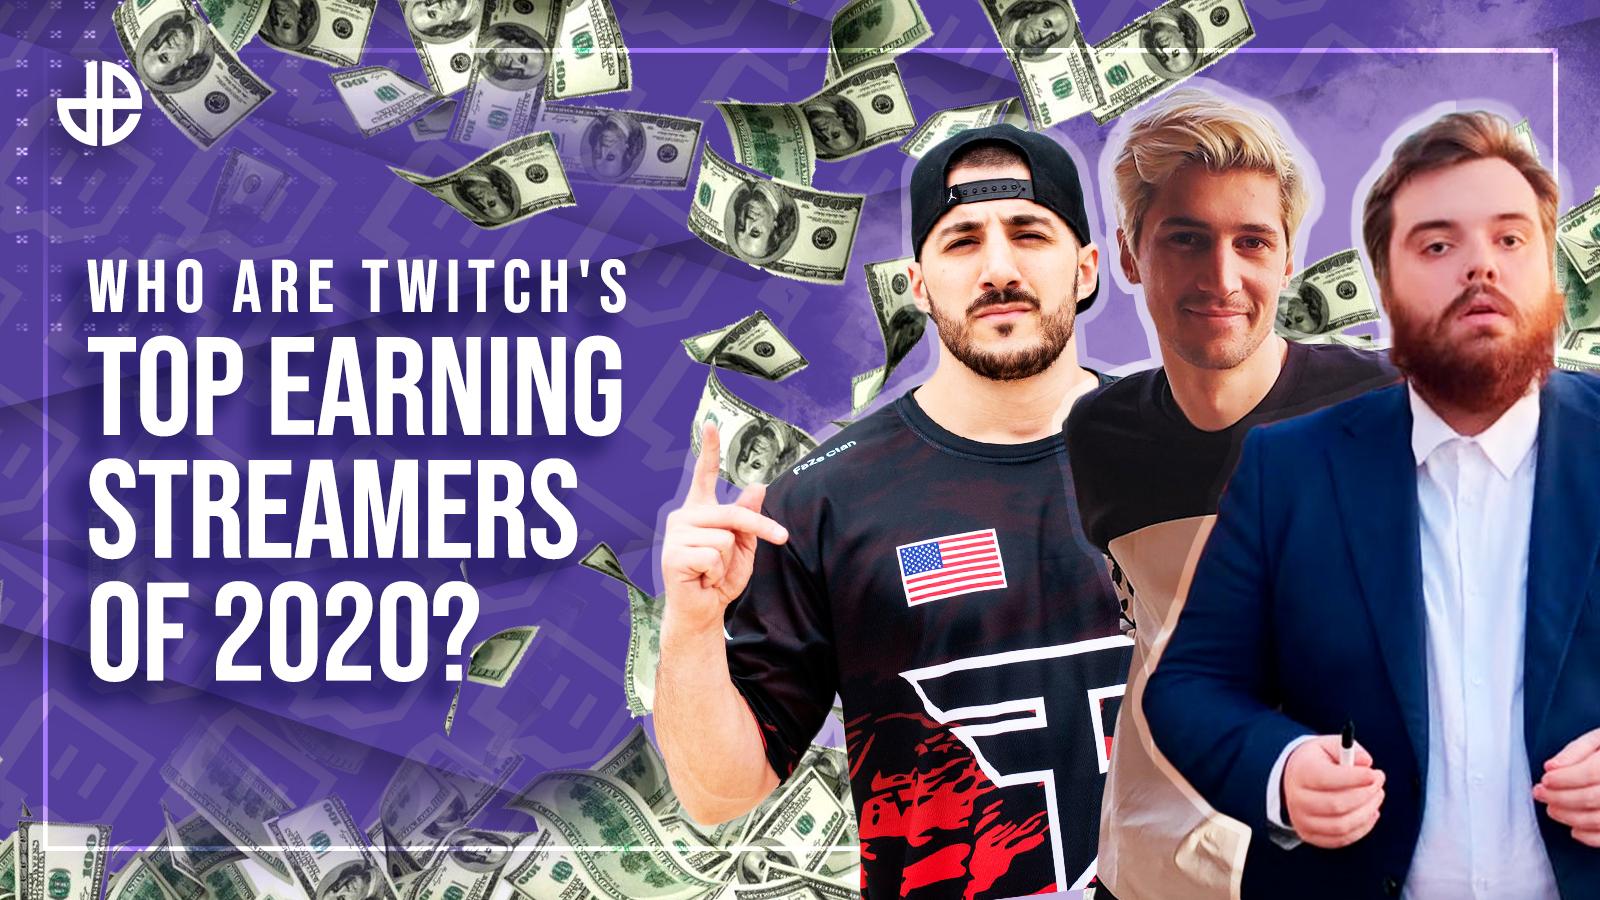 Top 10 Esports Twitch Streamers - All-Time & 2020 Rankings